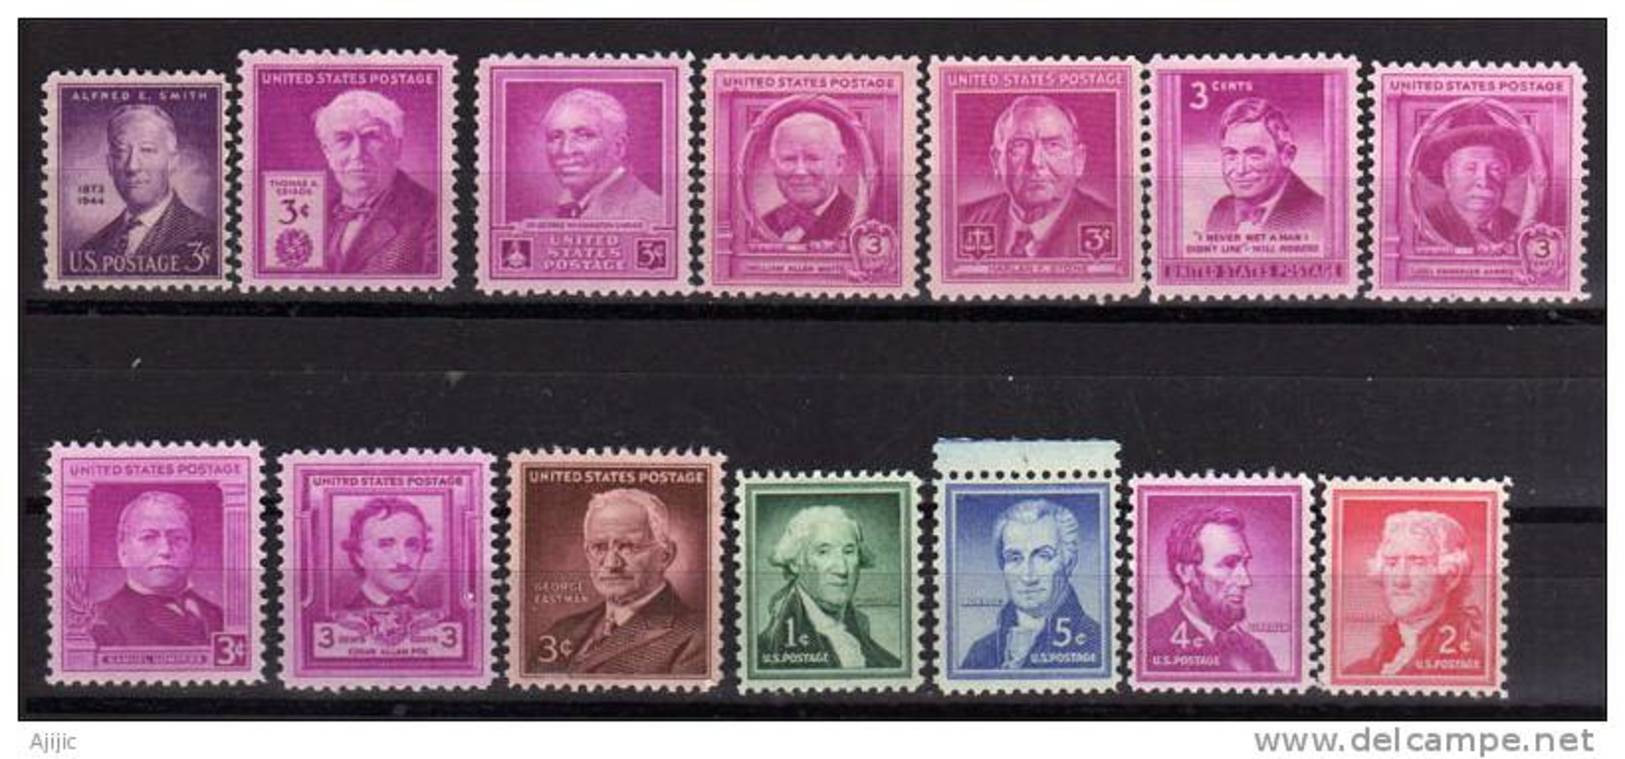 Personnalites Americaines (Edgar A.Poe,Jefferson,Lincoln,James Monroe,Will Rogers,etc) 14 T-p Neufs ** - Unused Stamps